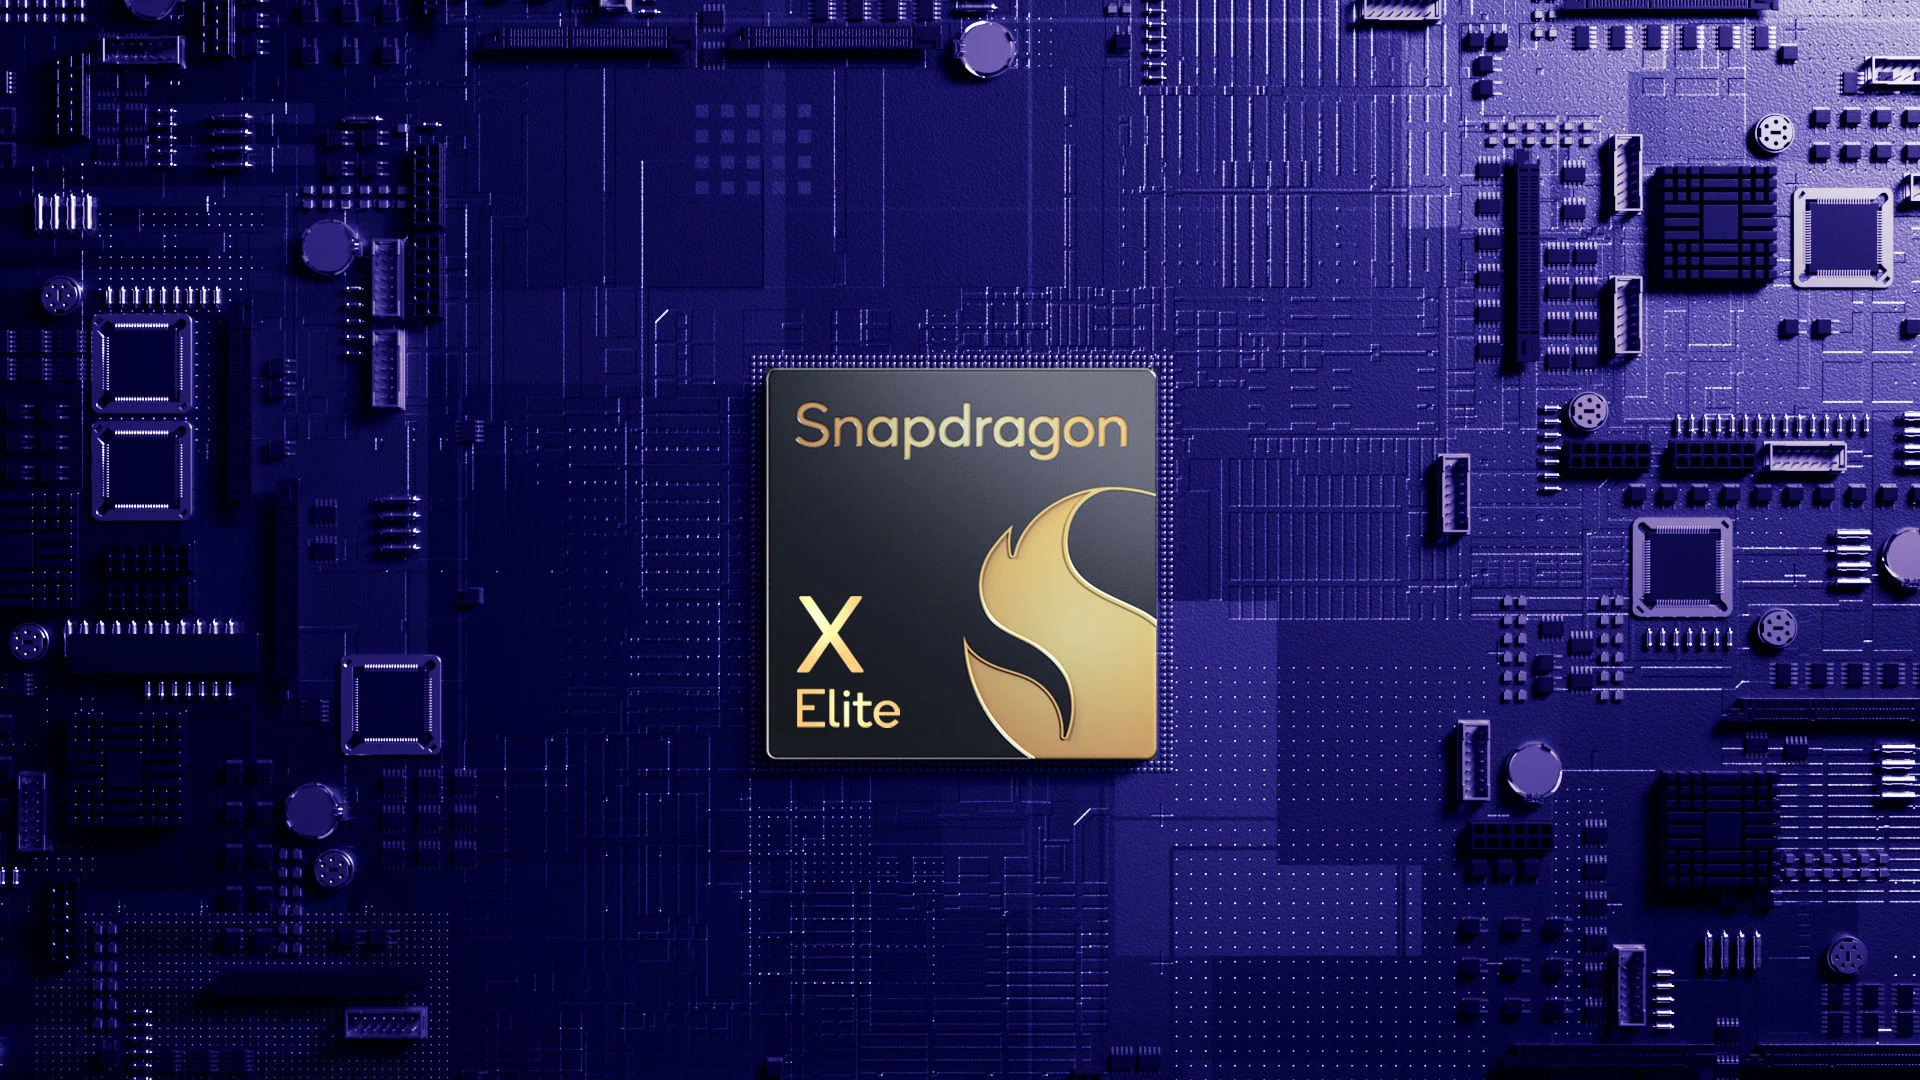  The end of porting?  The Qualcomm Snapdragon X Elite can easily run x86/64 games

